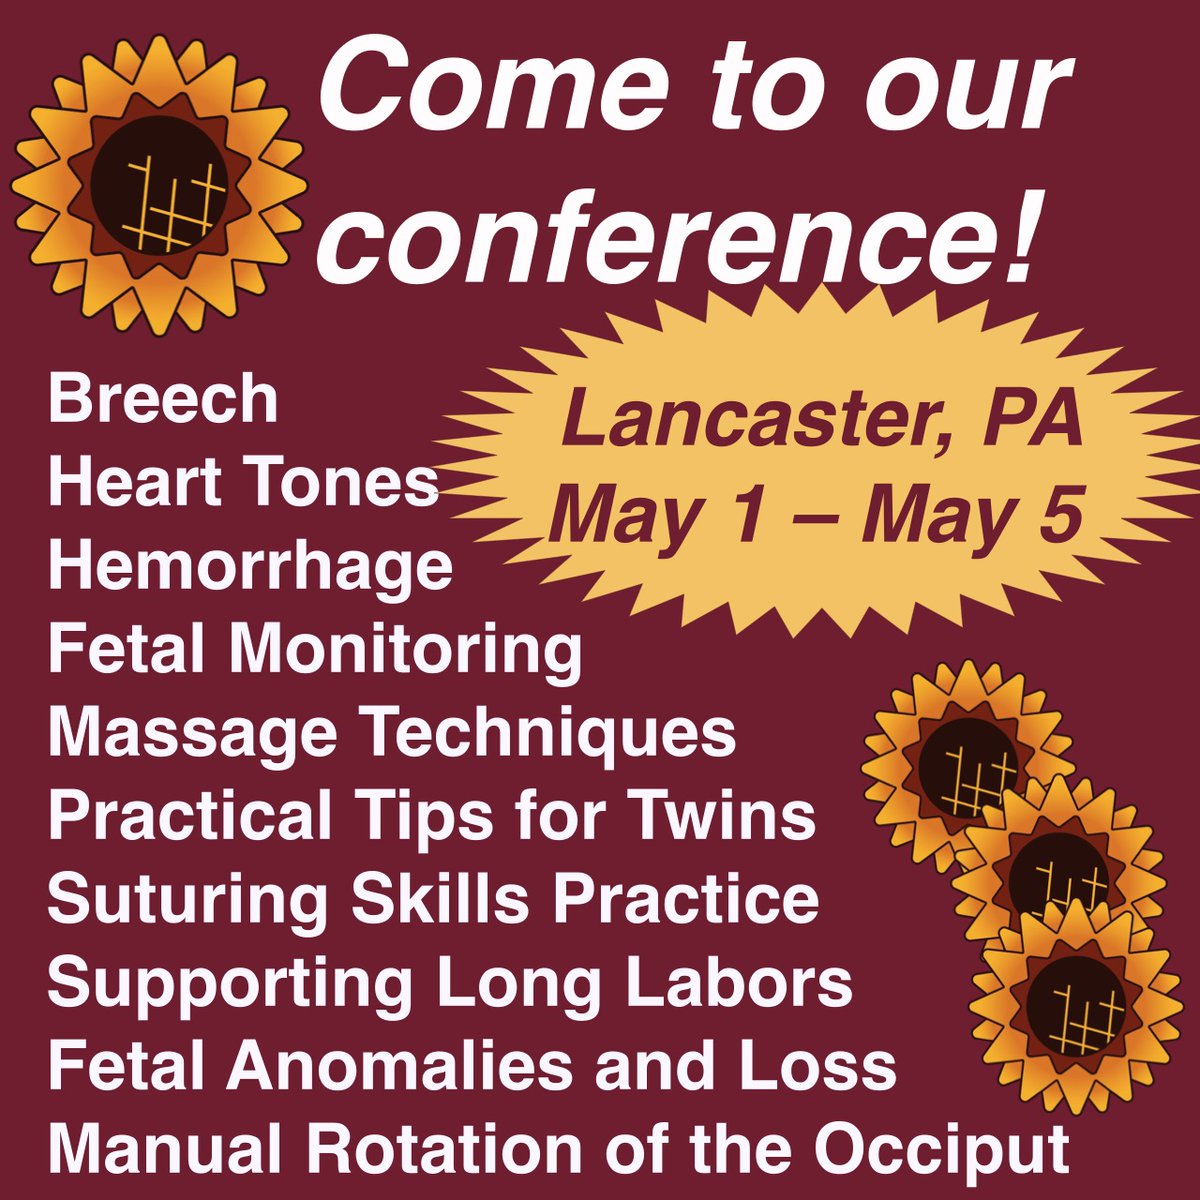 Everyone is welcome at the Midwifery Today conference in Lancaster, Pennsylvania, May 1–5 midwiferytoday.com/conference/lan…